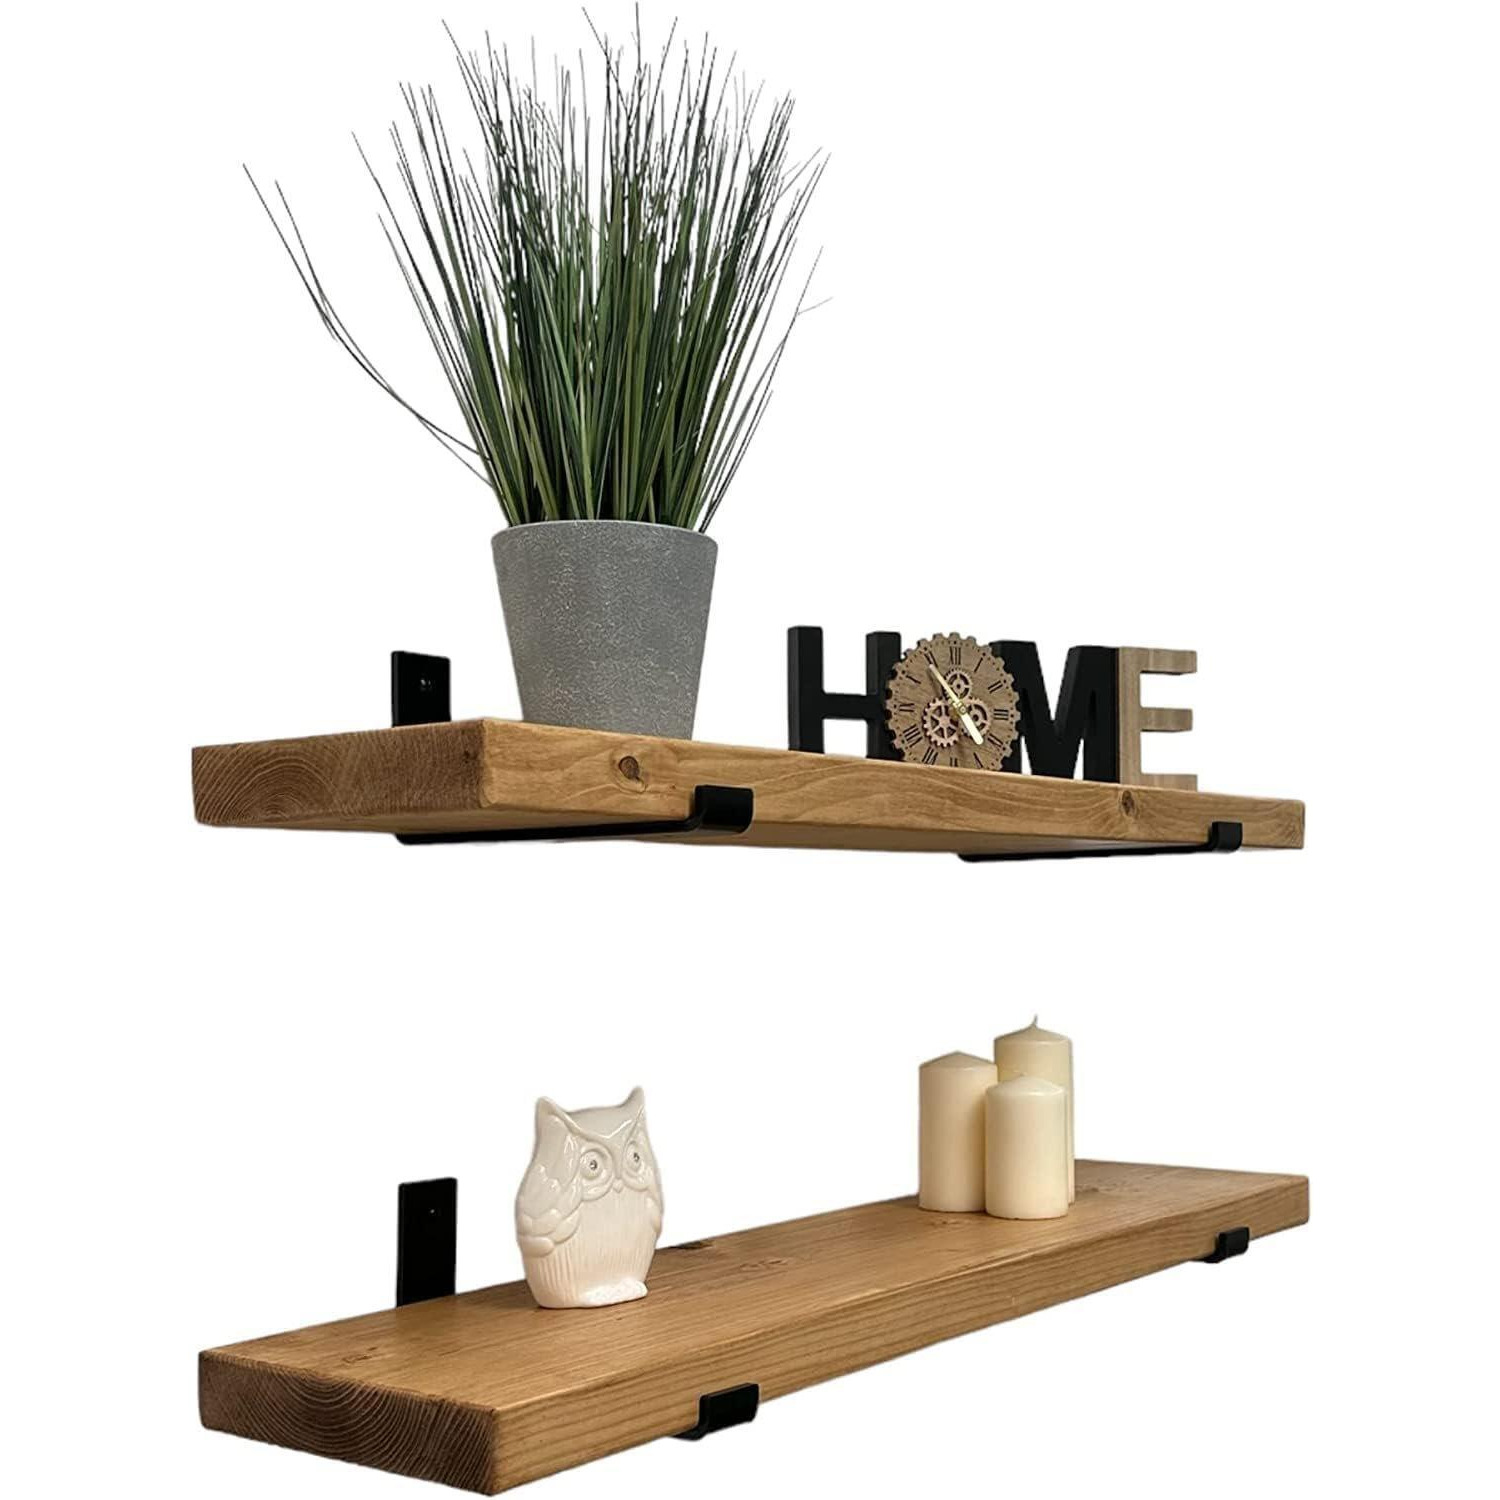 Handcrafted Rustic Wooden Wall-Mounted Floating Shelves with Black L Brackets, Kitchen Living Room Decor(Set of 2, 70 cm Long) - image 1